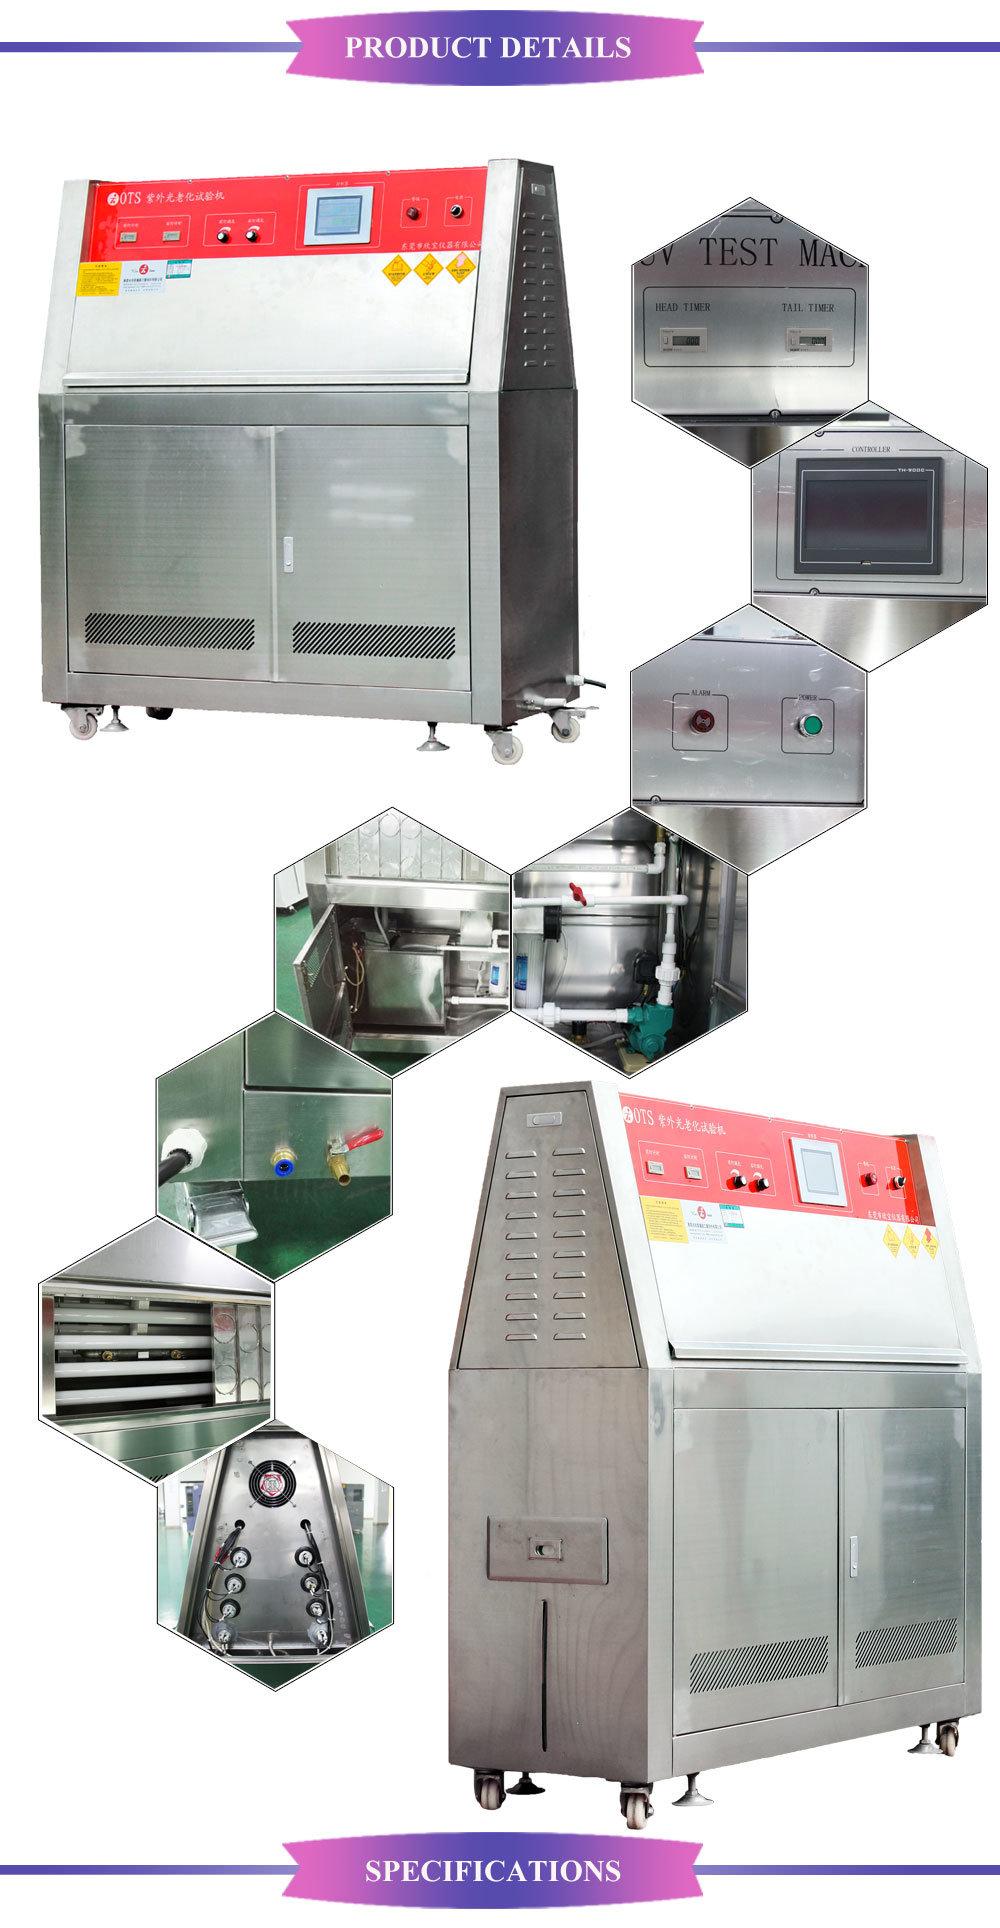 Automatic UV Speed-up Aging Testing Equipment